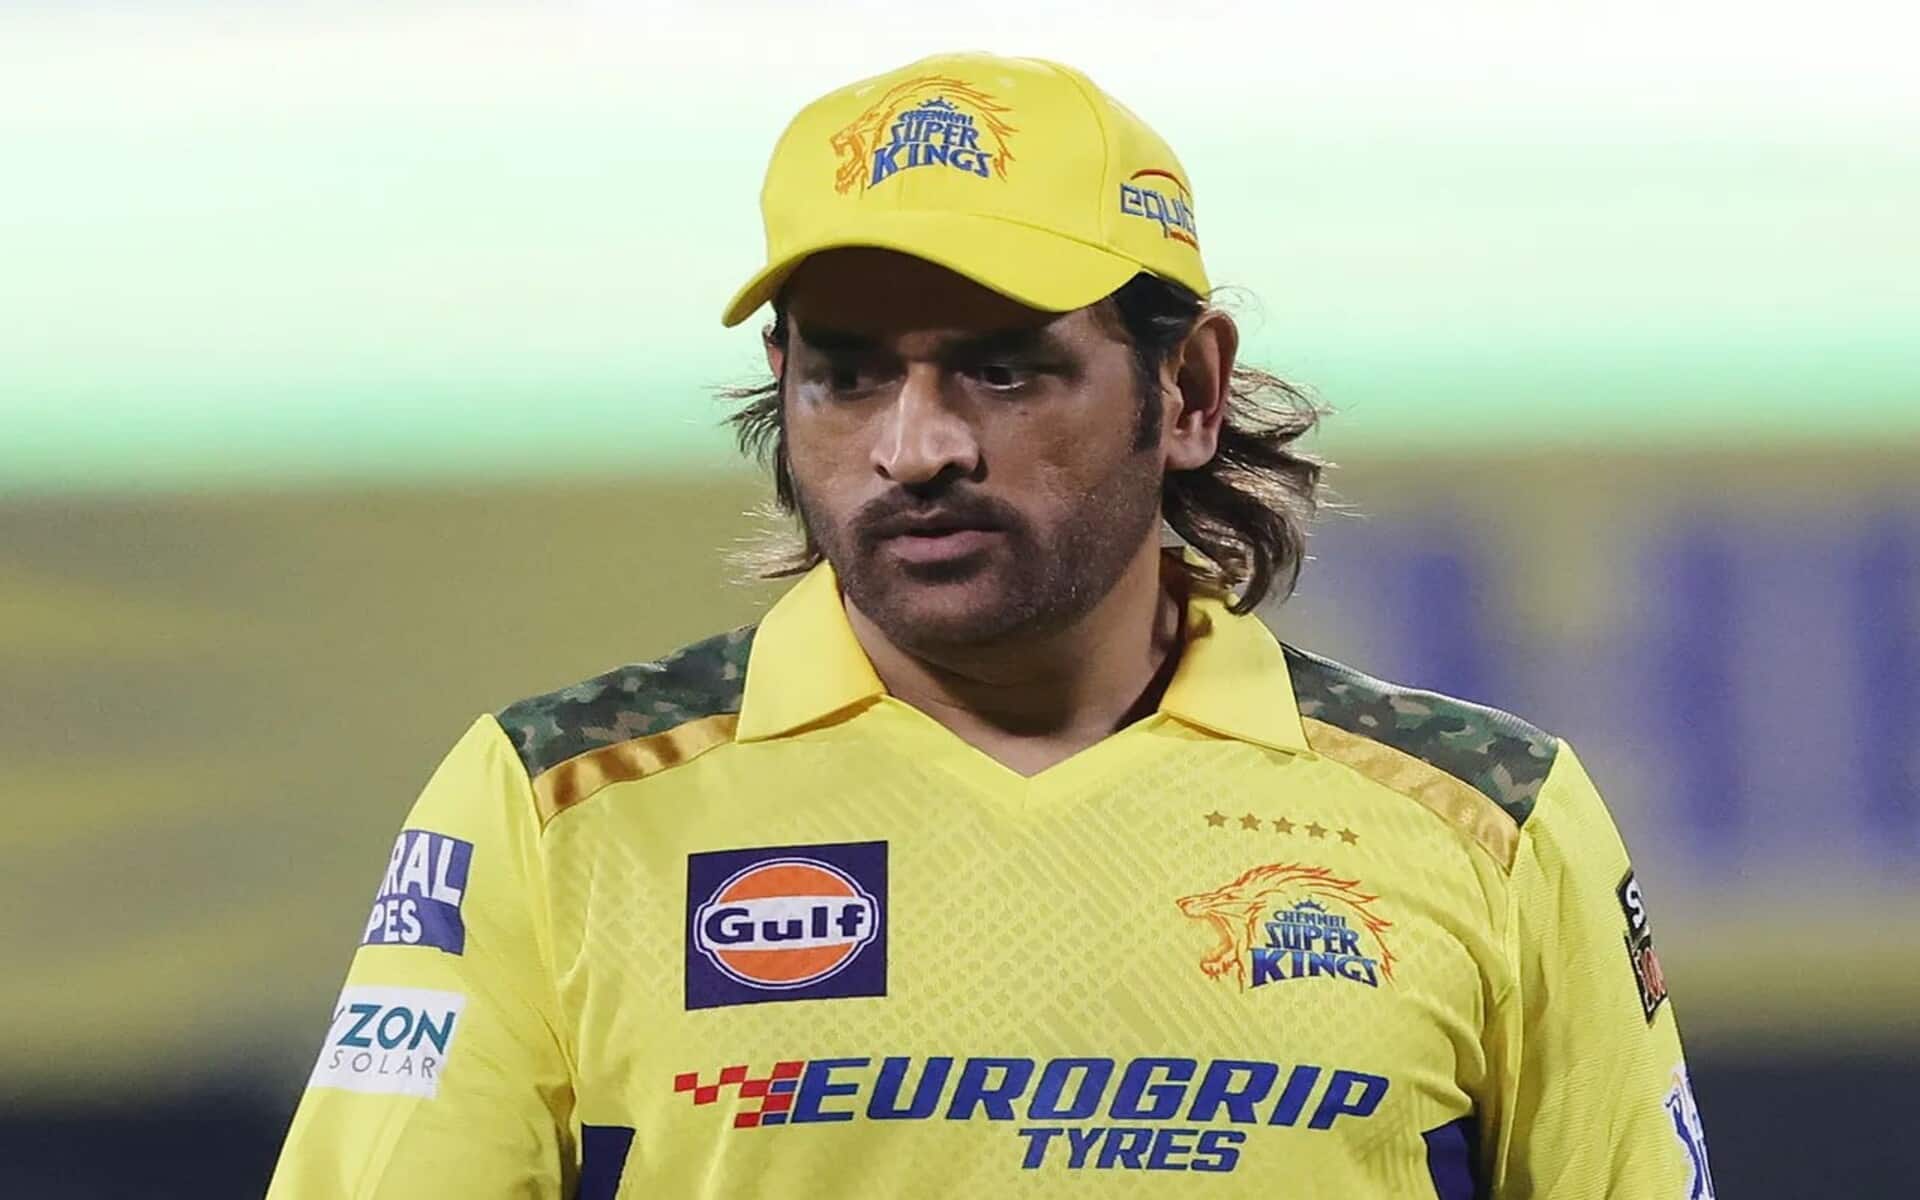 MS Dhoni back with his long hair (Source: IPL)